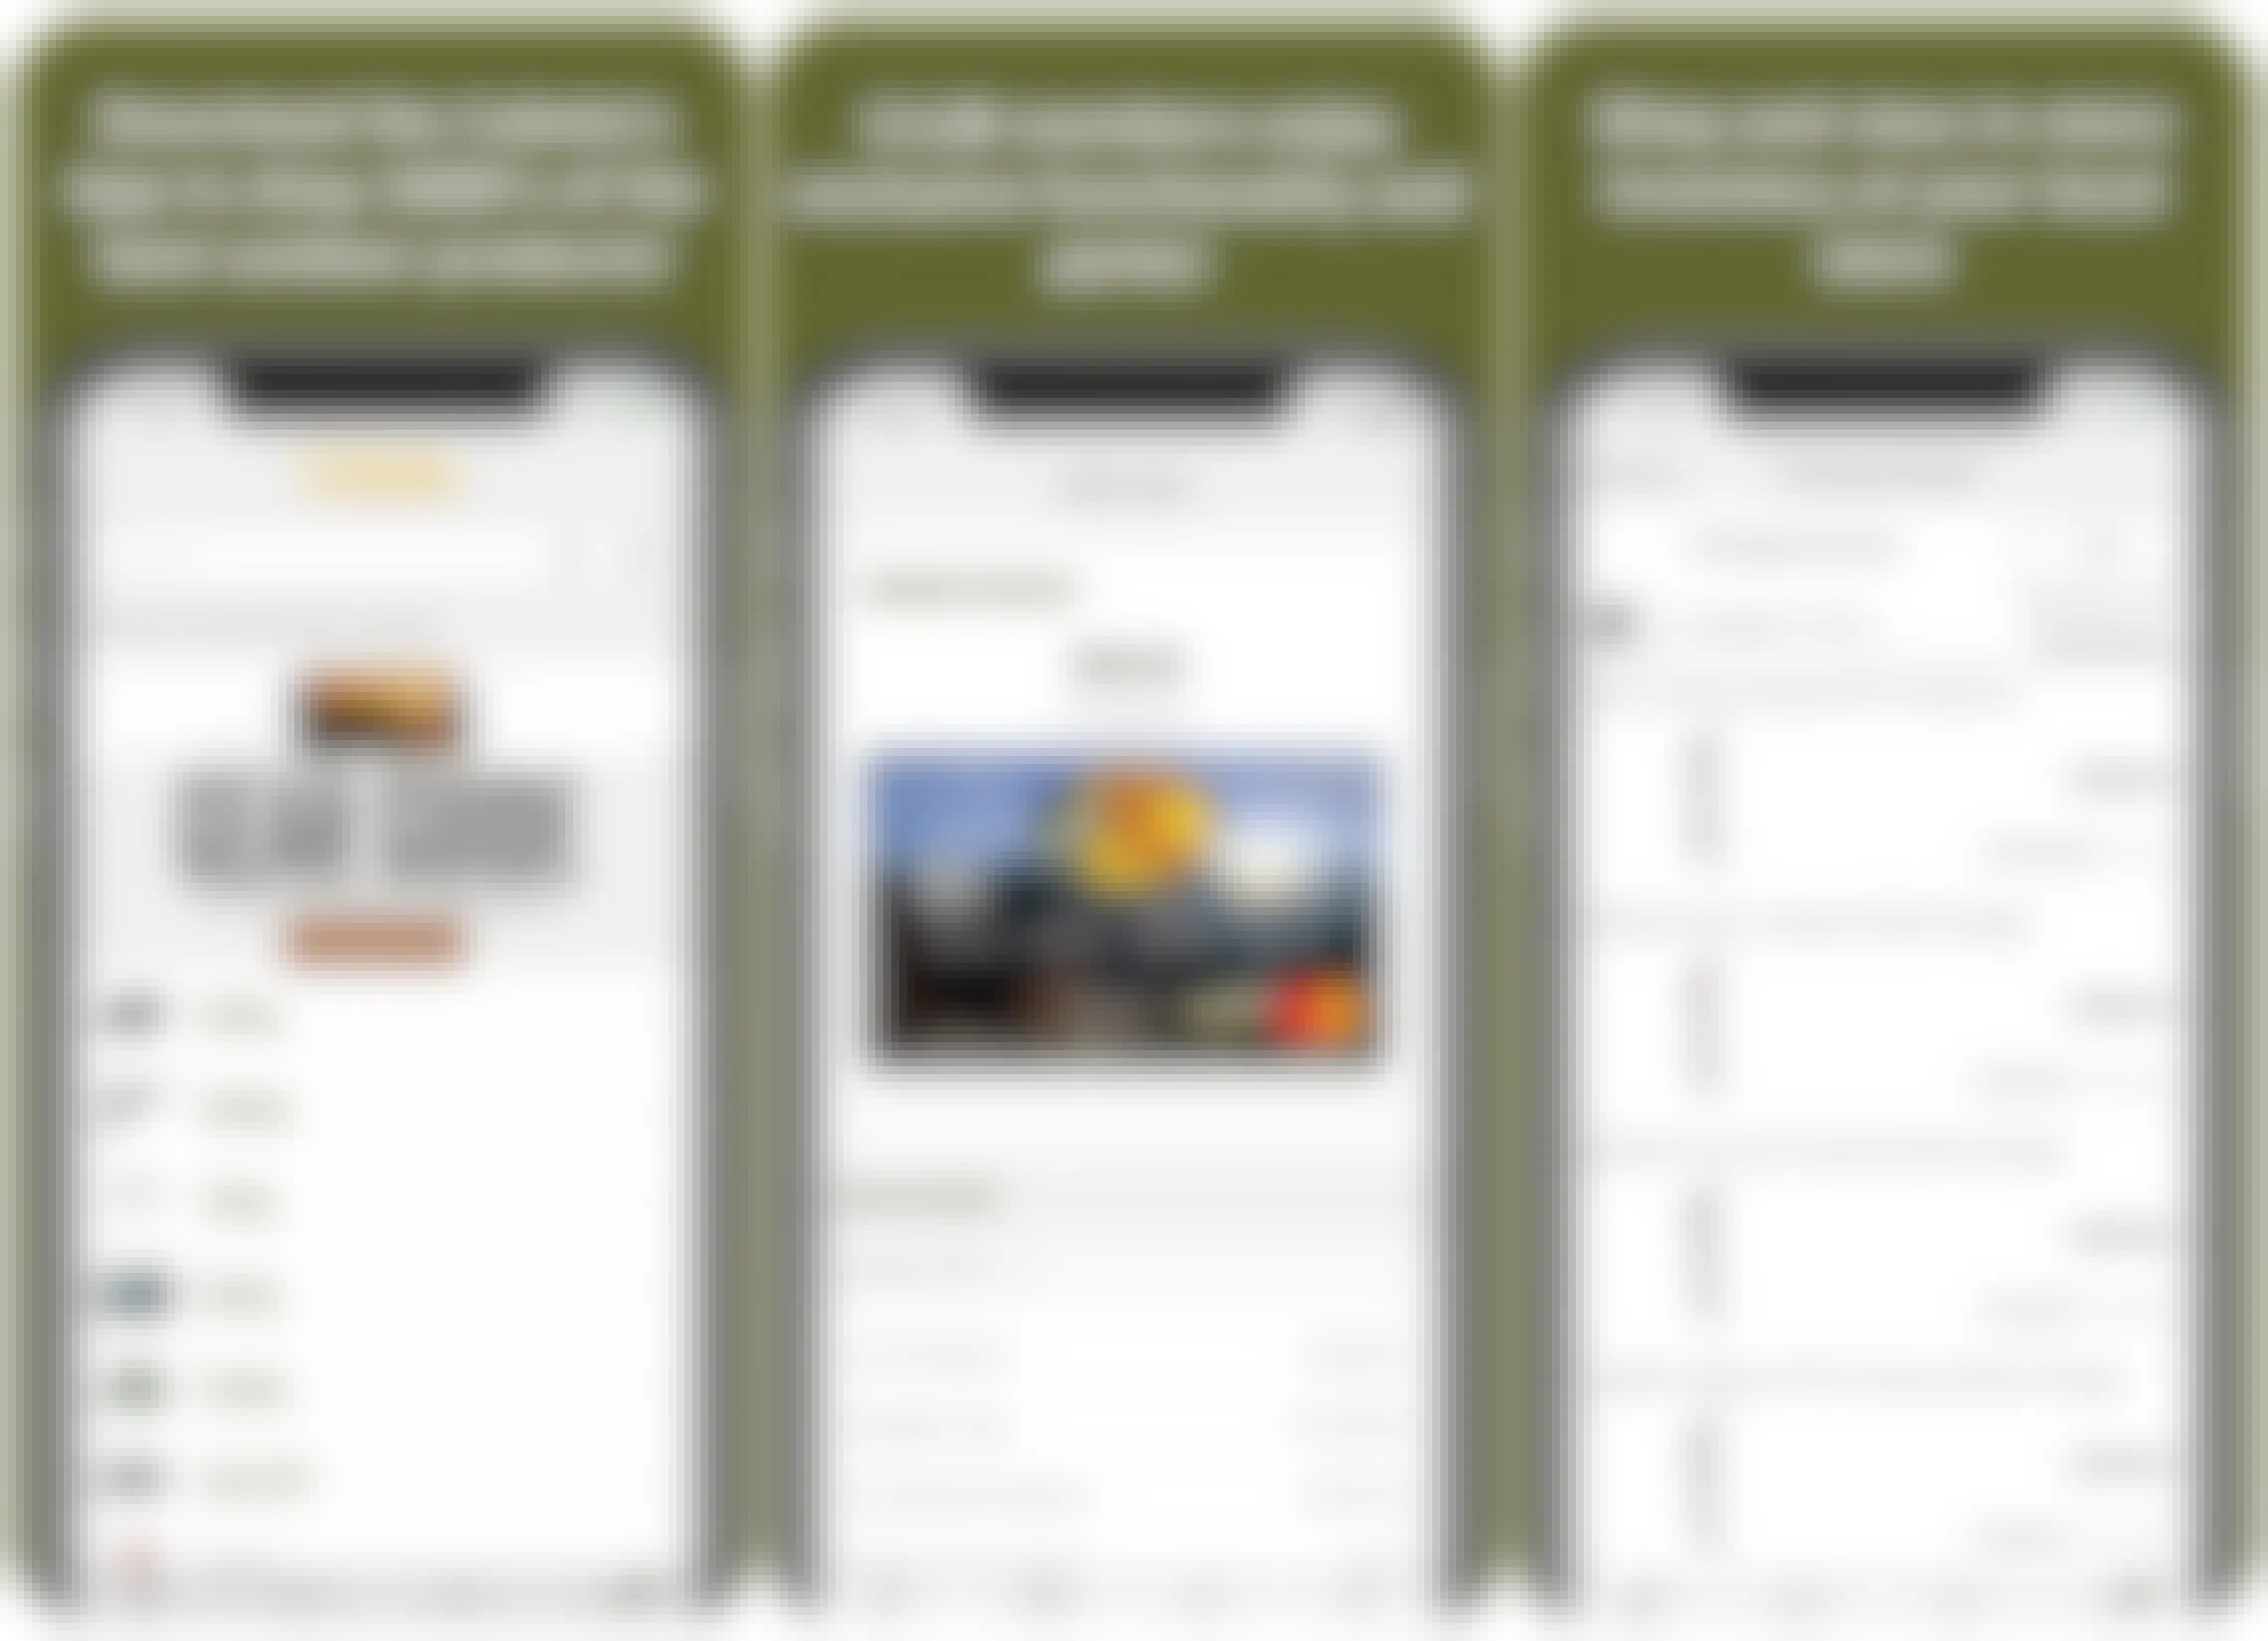 A graphic of three phones showing the Cabela's mobile app features.